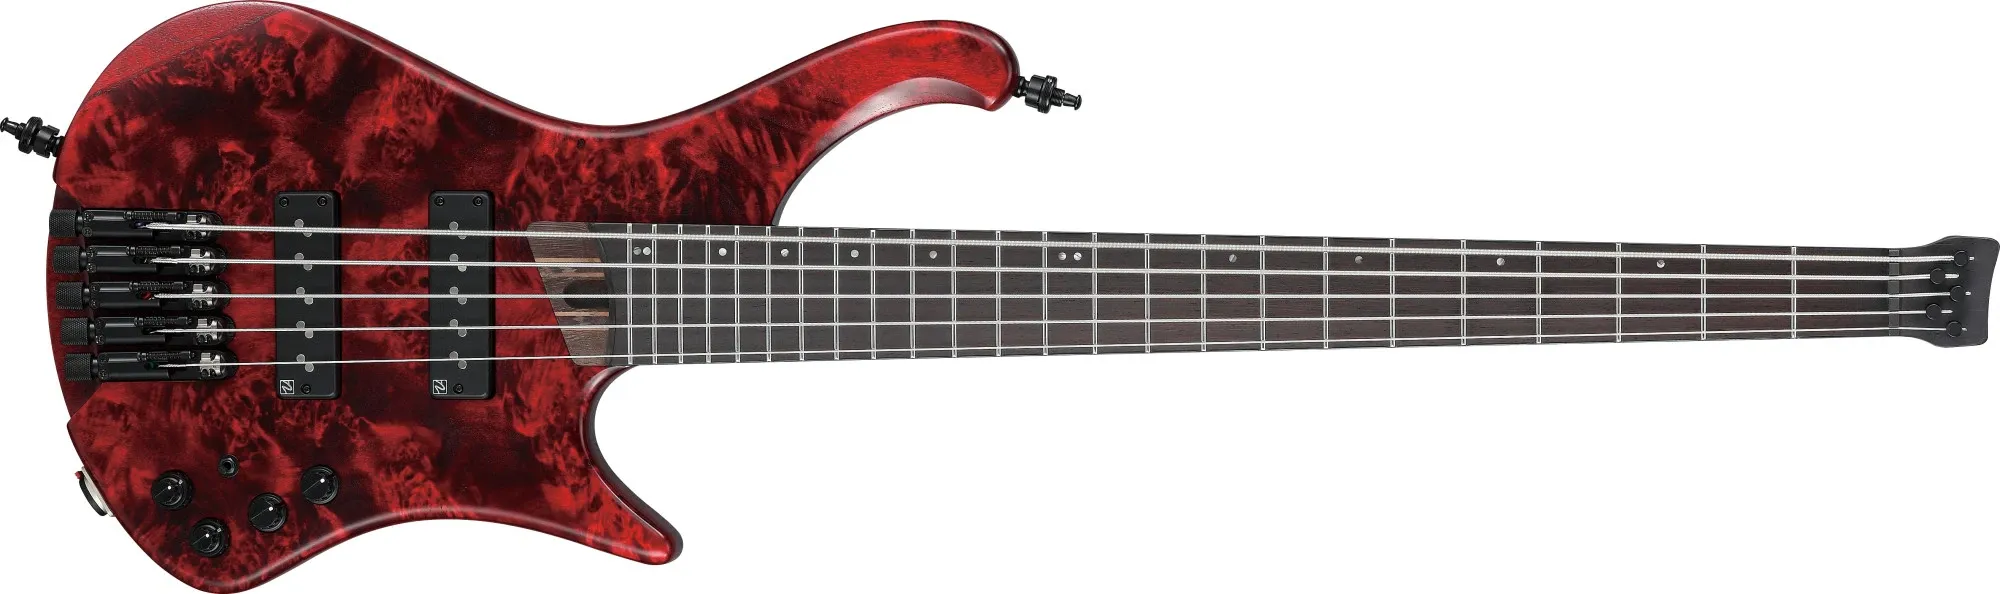 Ibanez EHB1505-SWL stained wine red low gloss